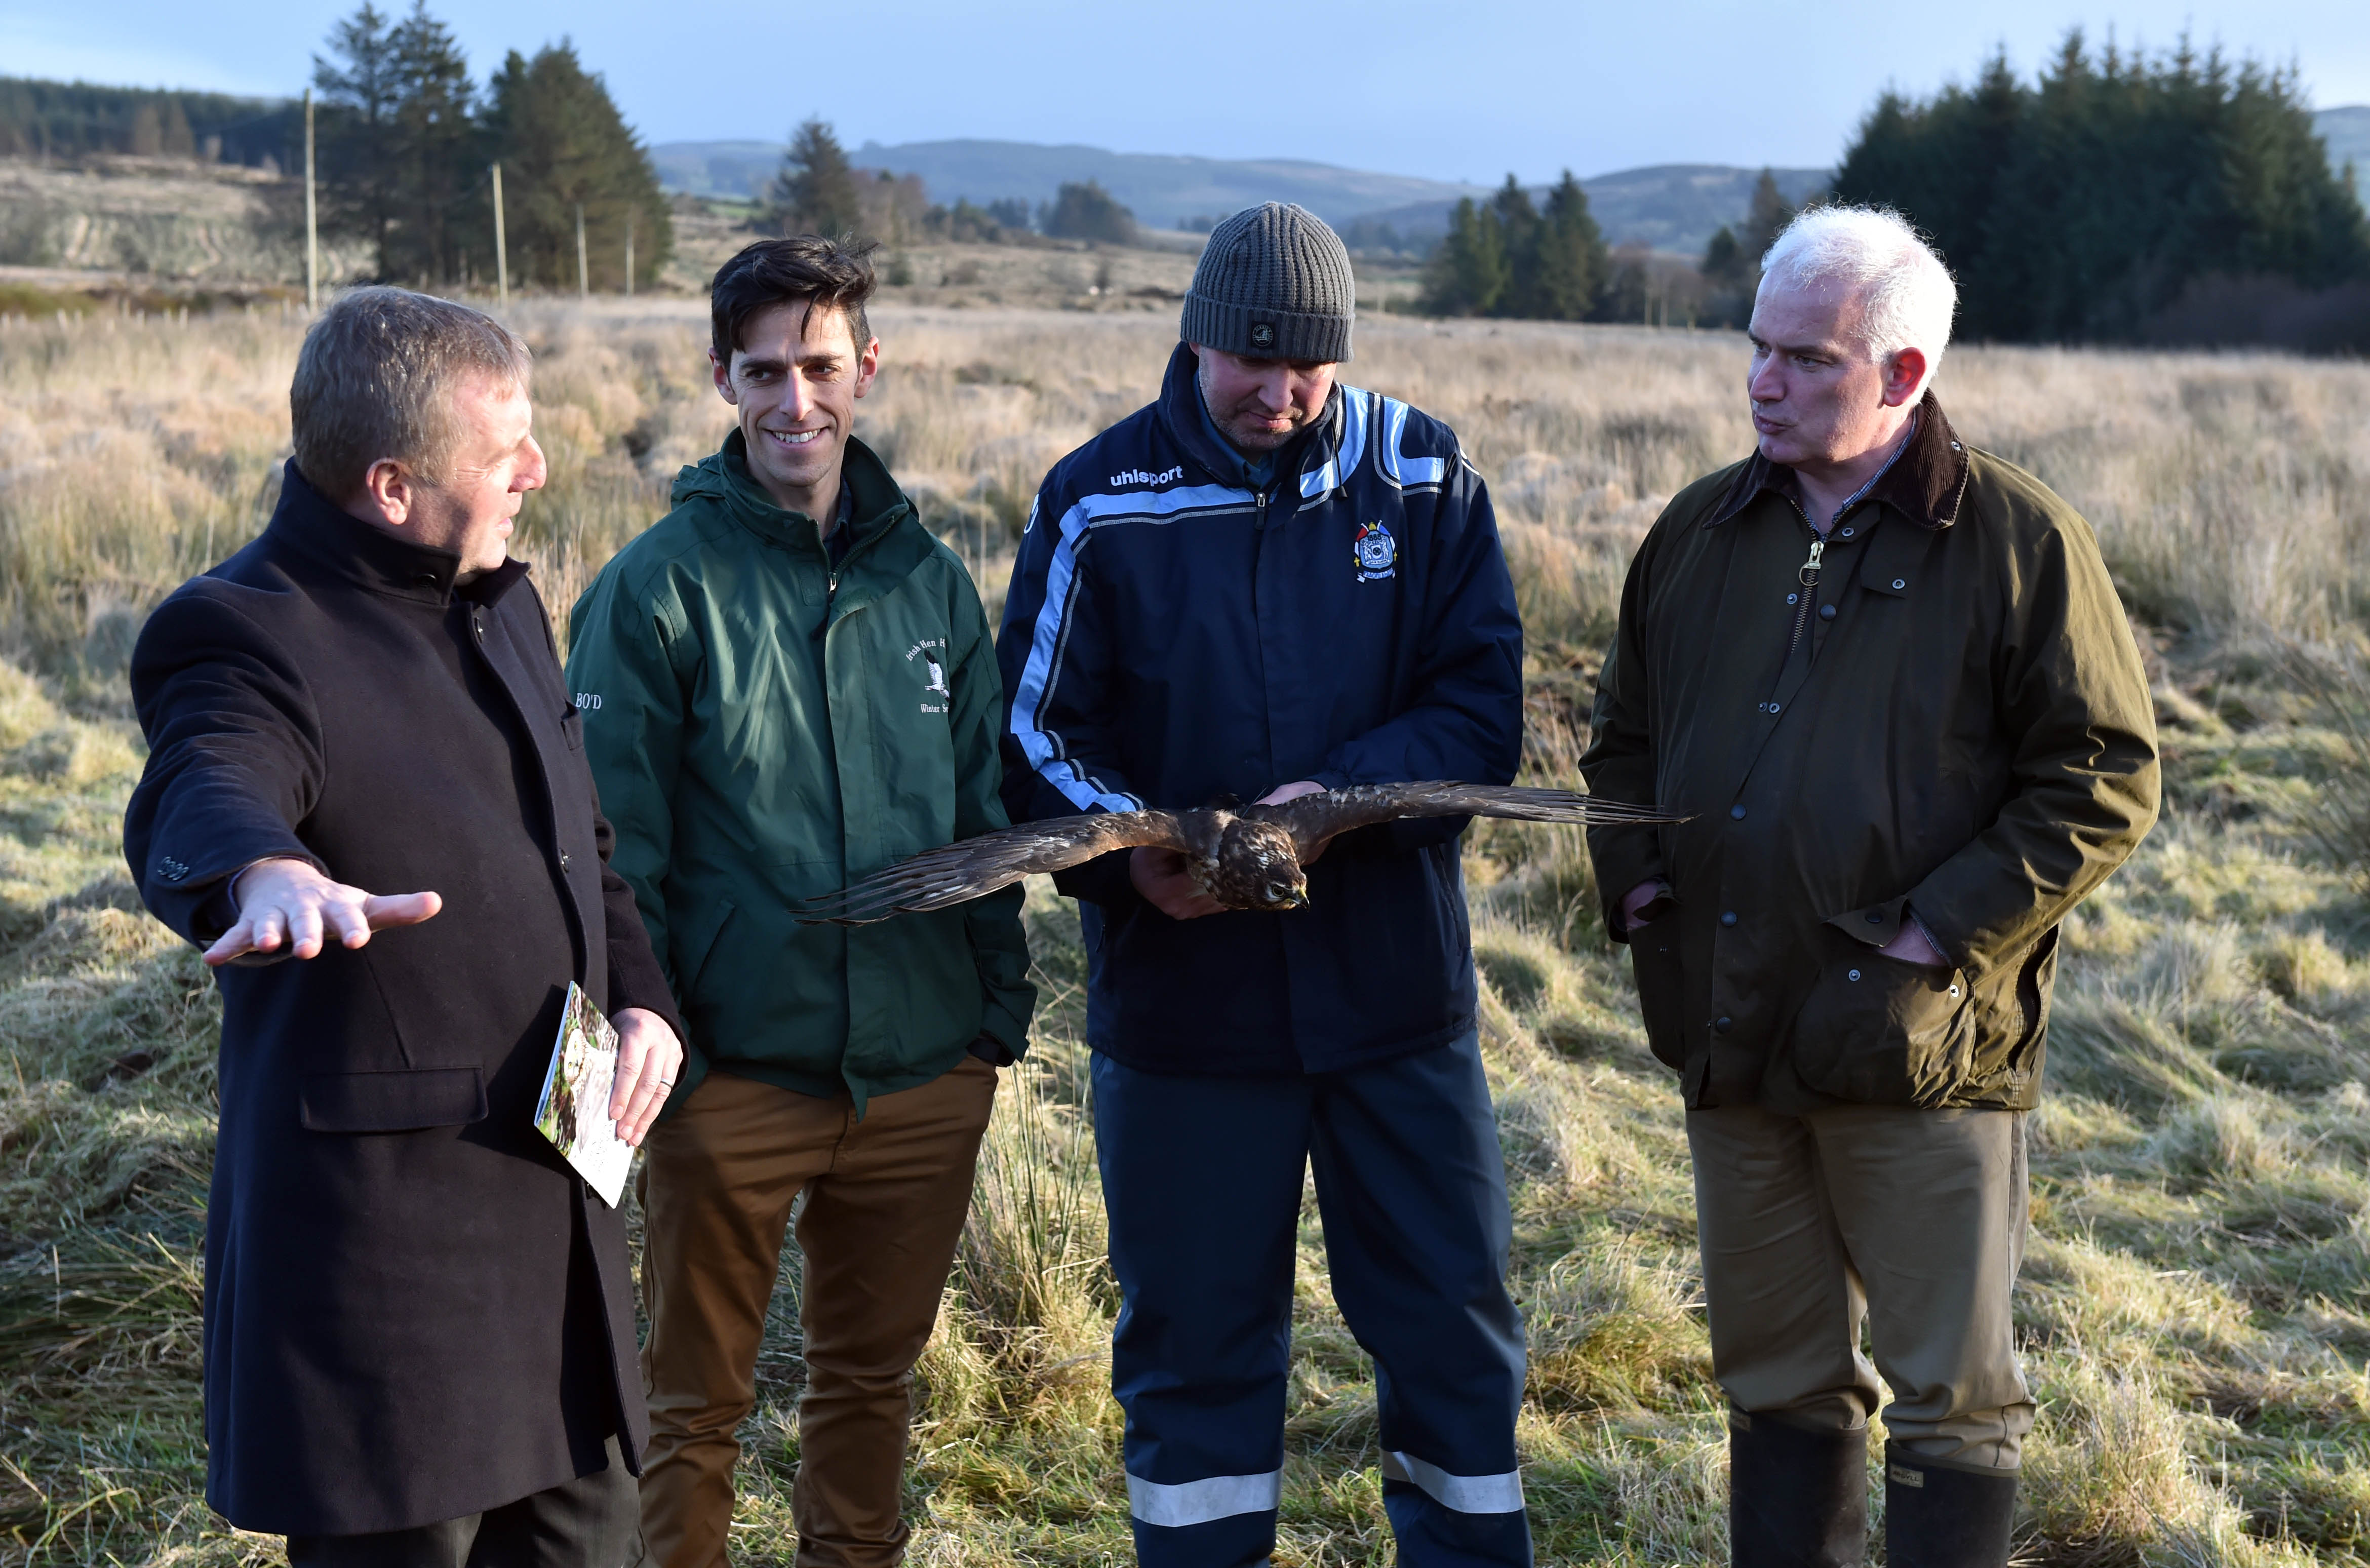 Creed Welcomes Commencement of 2018 Farmer Payments under the Hen Harrier Programme and the Burren Programme